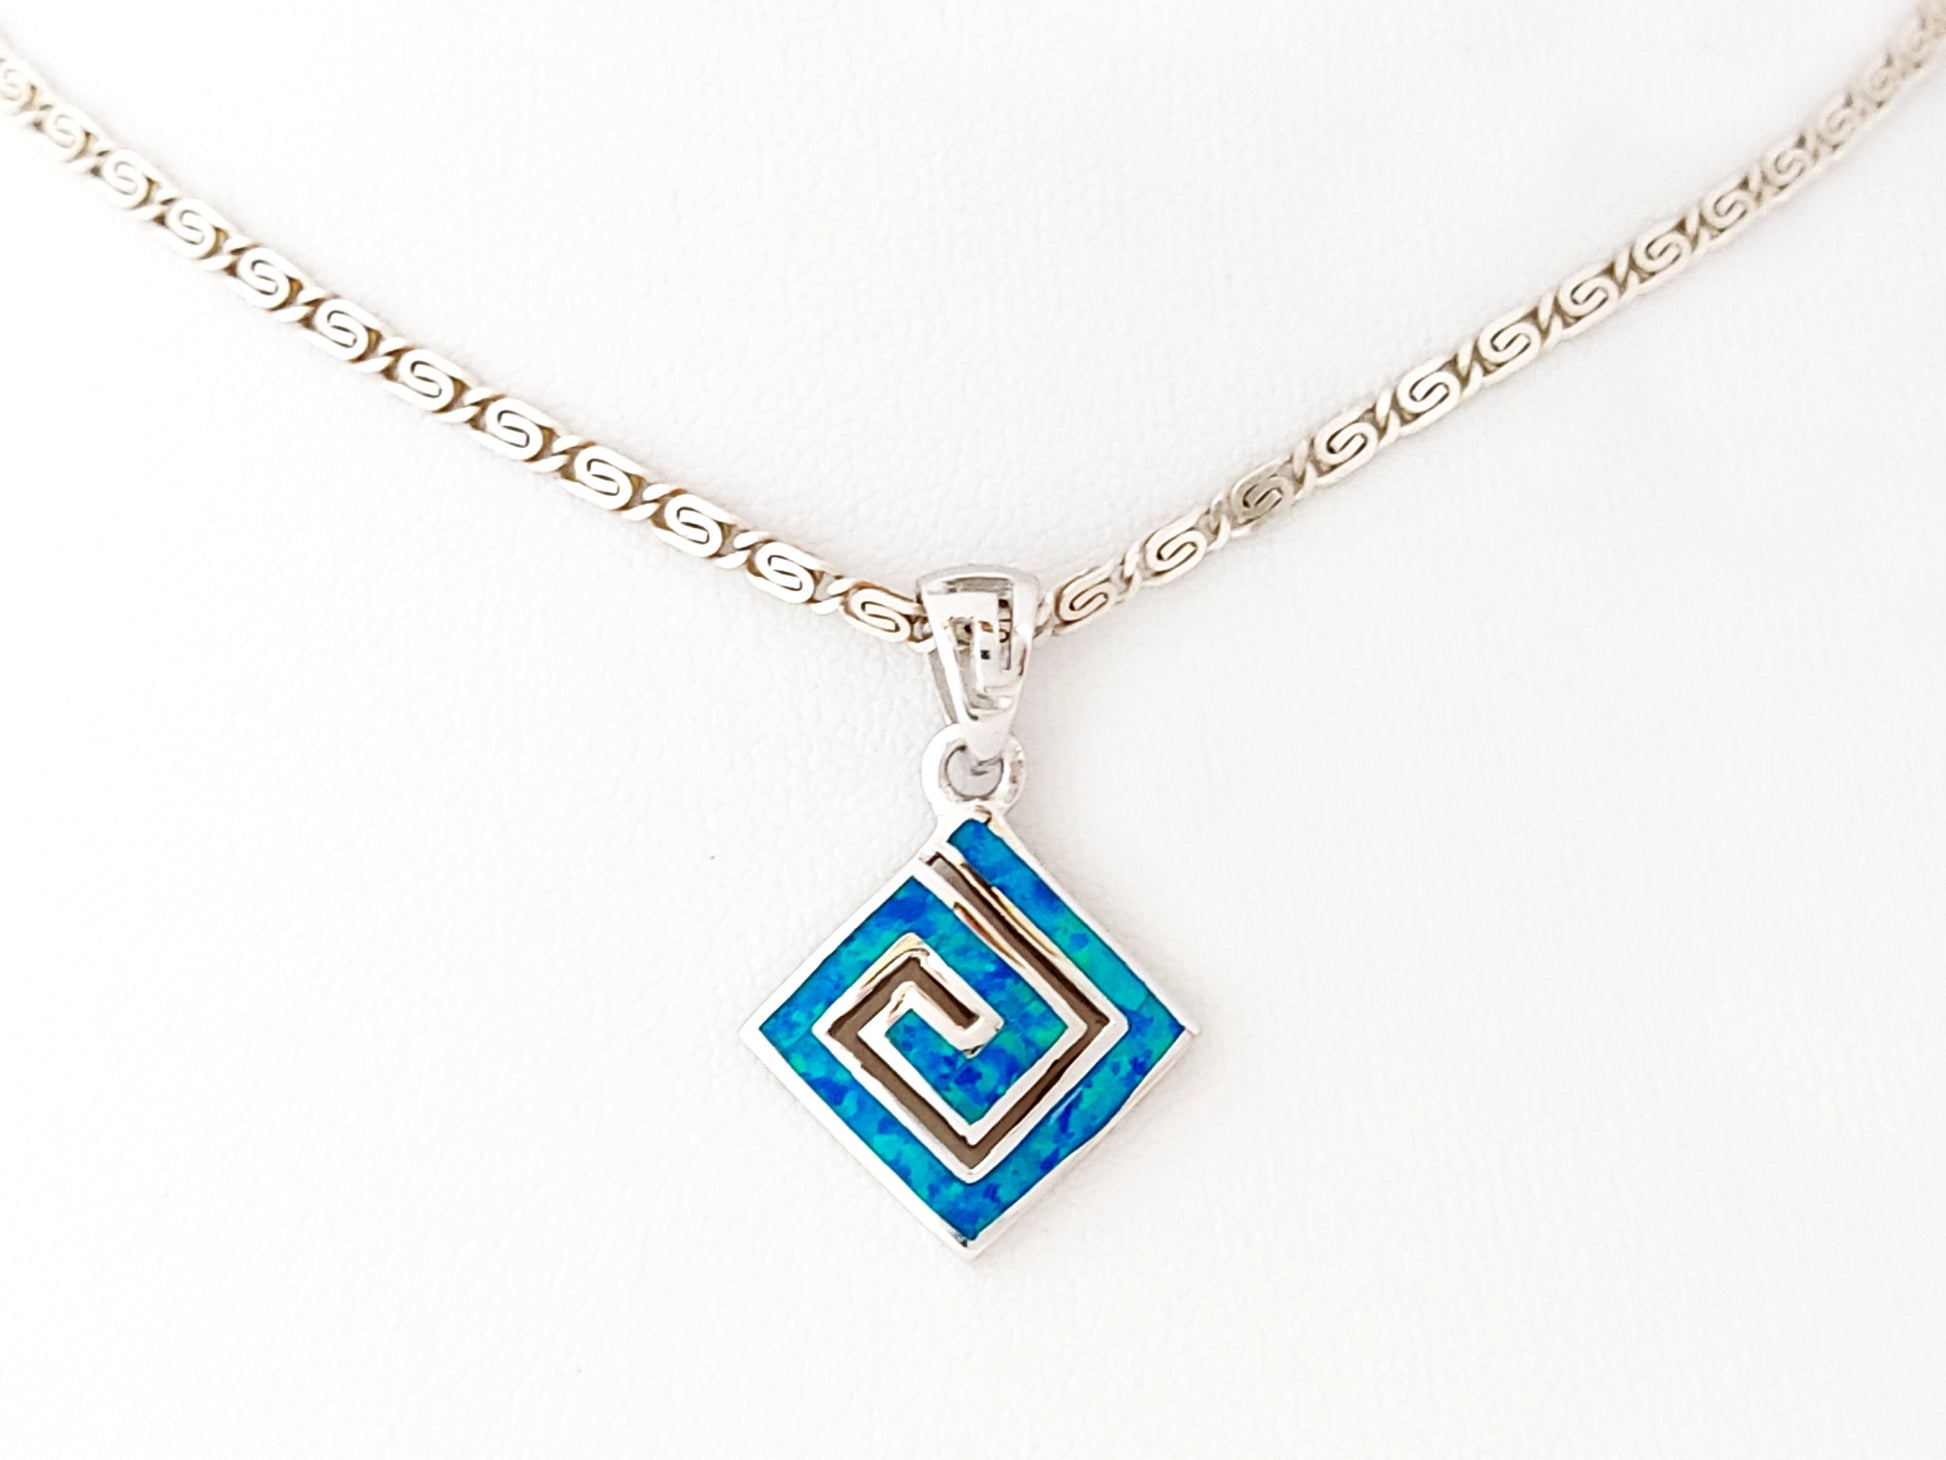 Sterling Silver 925 Blue Opal Greek Key Infinity Pendant Necklace - Exquisite Greek-inspired design with Blue Opal stone on 2mm silver chain. Handcrafted in Greece, Hallmark 925.